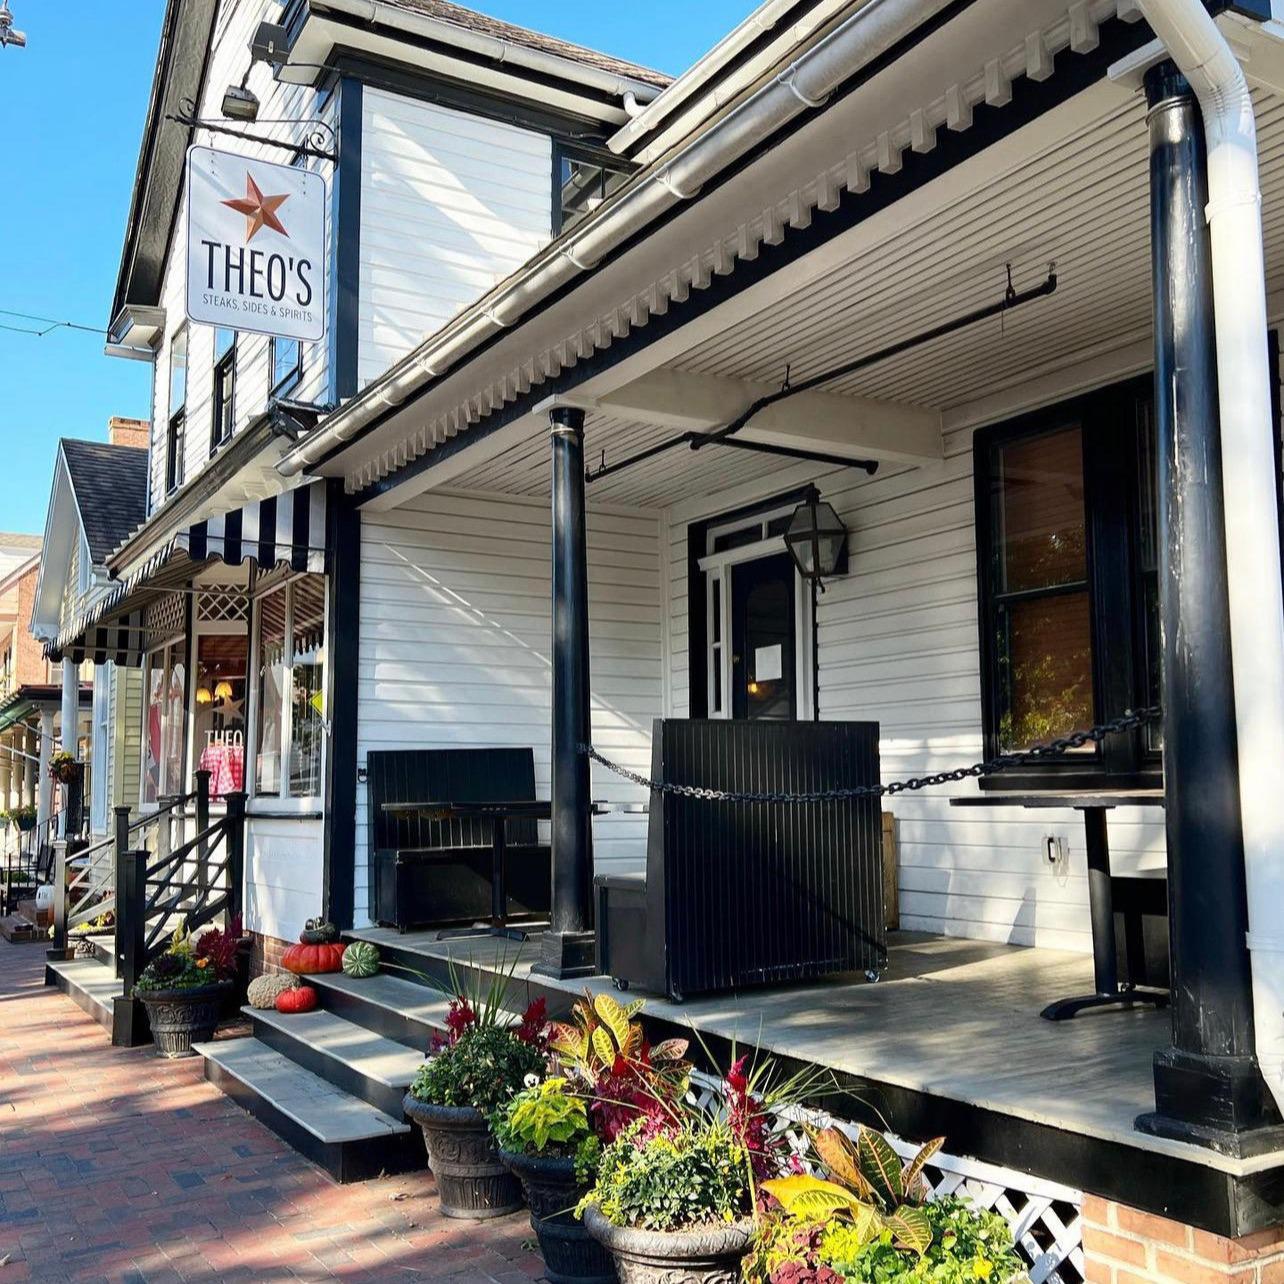 Theo's Steaks, Sides & Spirits in St. Michaels, Maryland